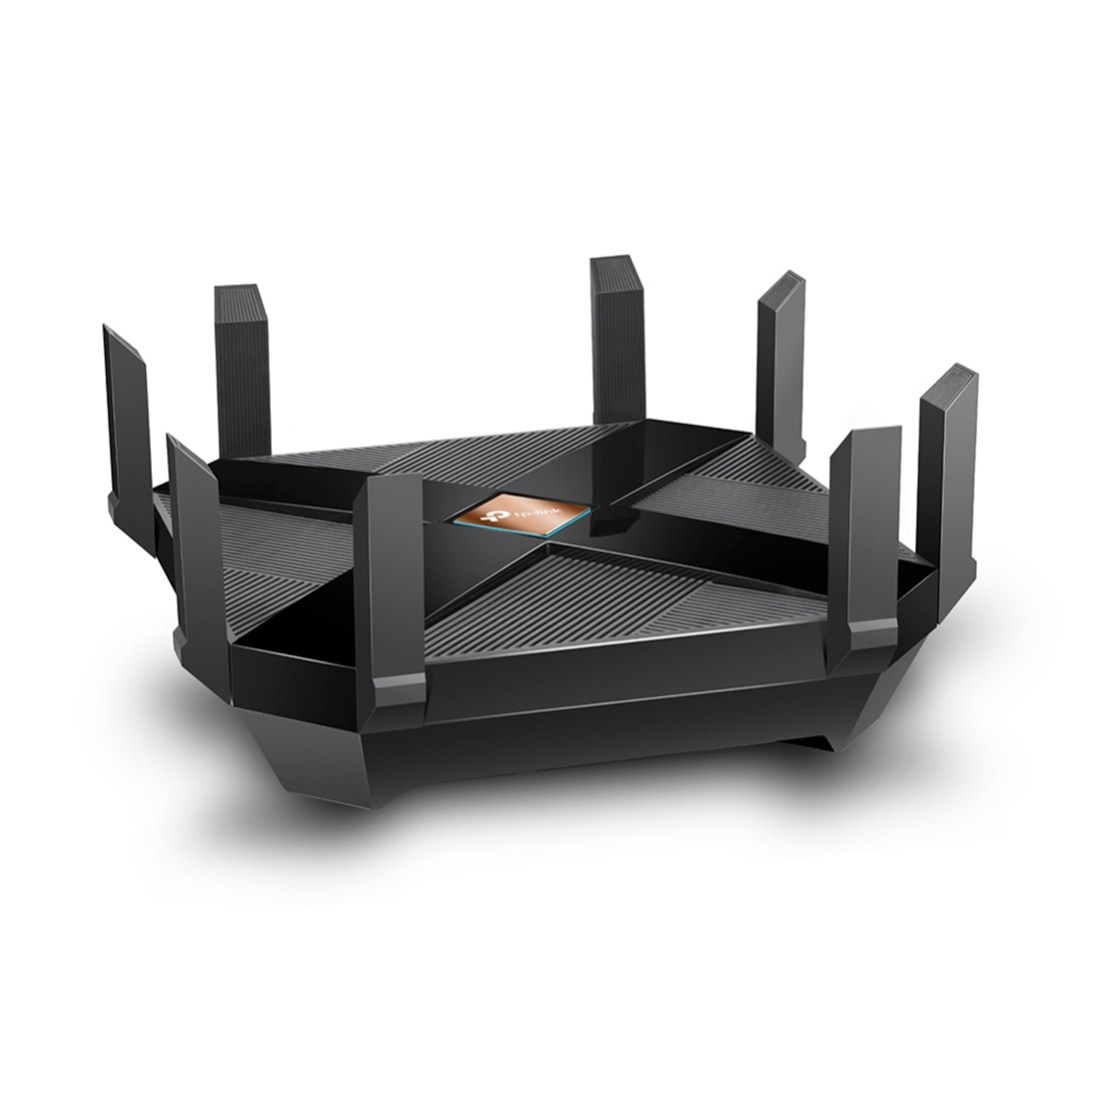 Маршрутизатор TP-LINK Archer AX6000